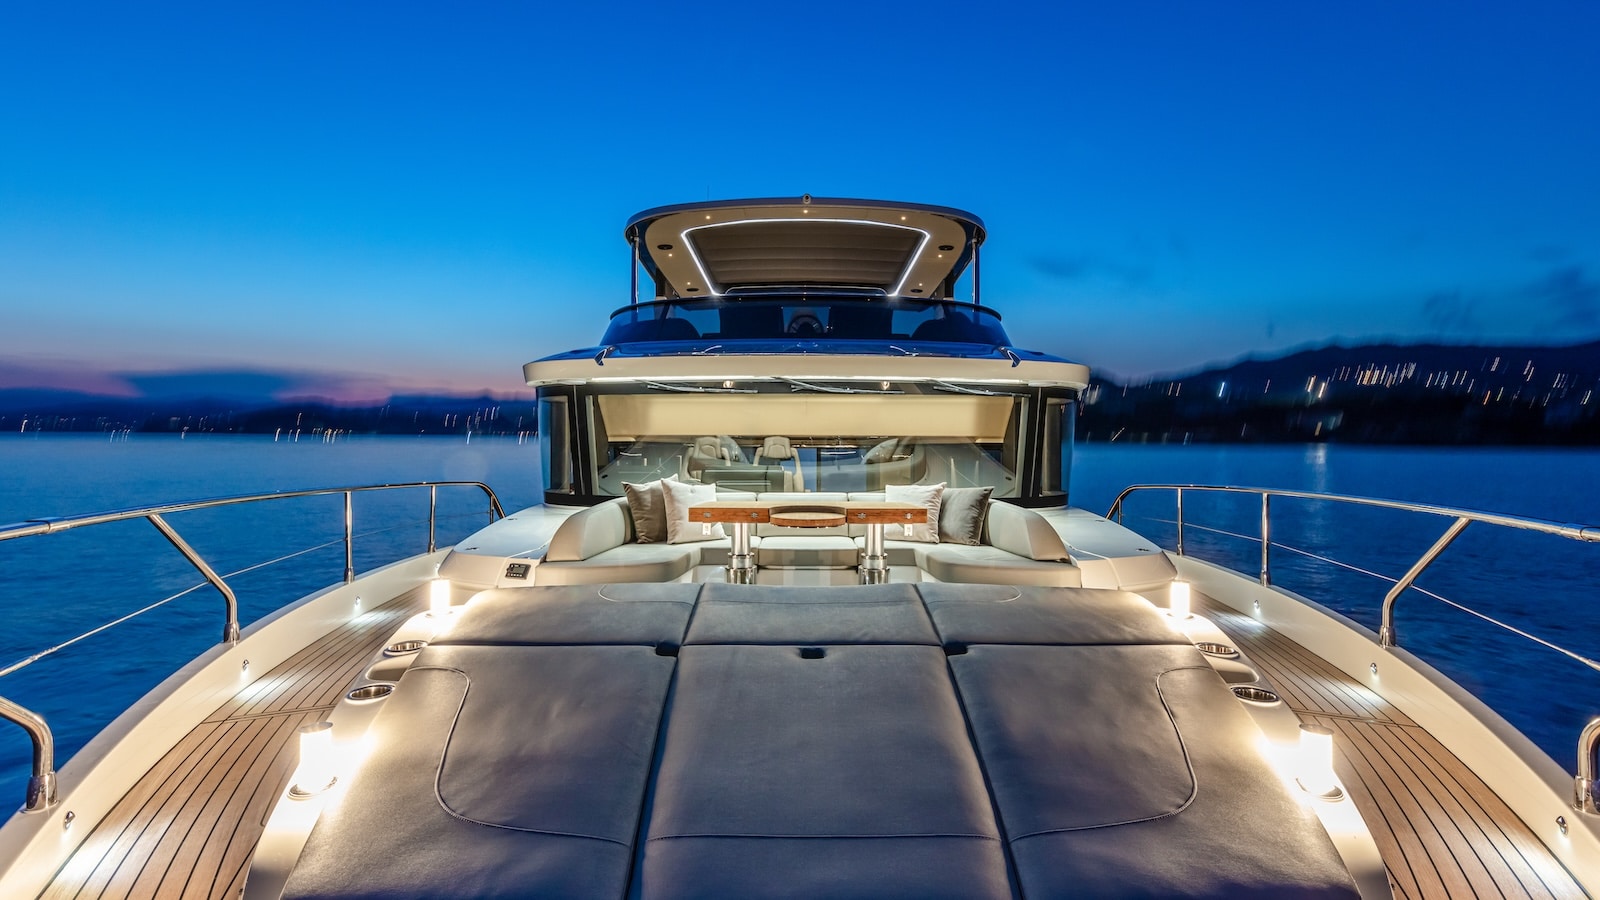 A WISE EQUITY entra no capital da Absolute Yachts